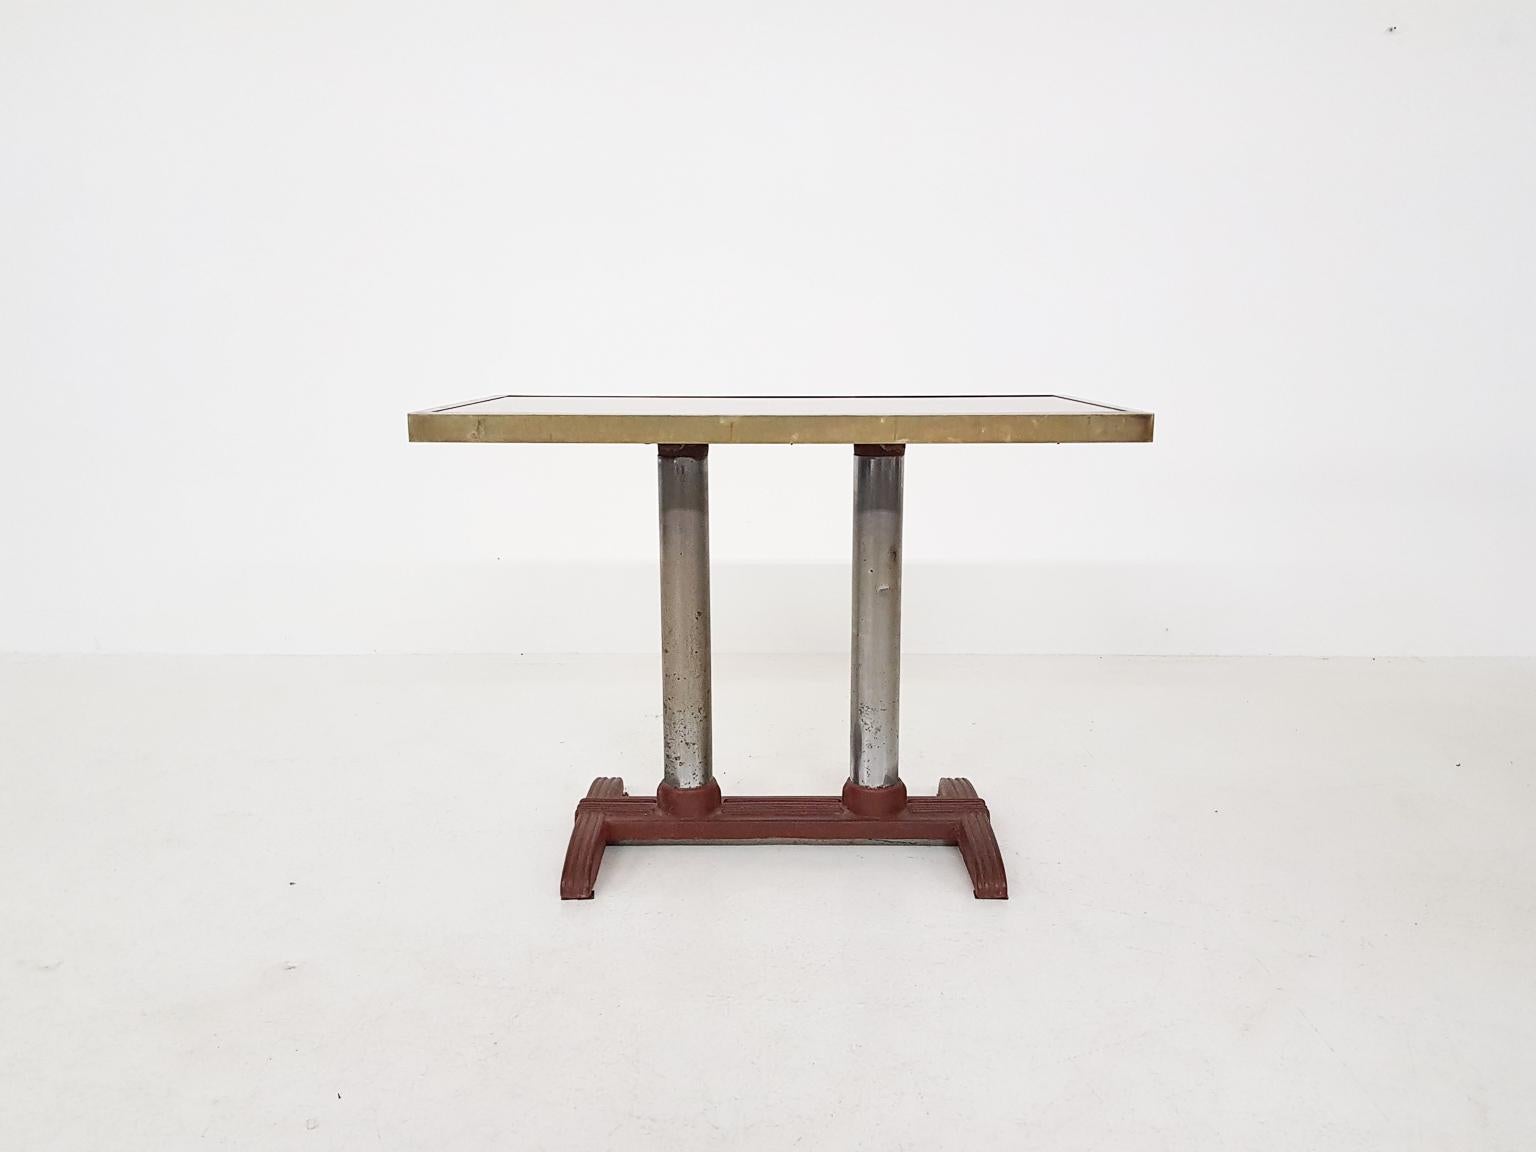 Very heavy table which could be used as a side, console or garden table. But you could also place a chair in front to use it as a little desk. Made between 1900 and 1930.

This table stood at an old canal house in Amsterdam. The foot is made of